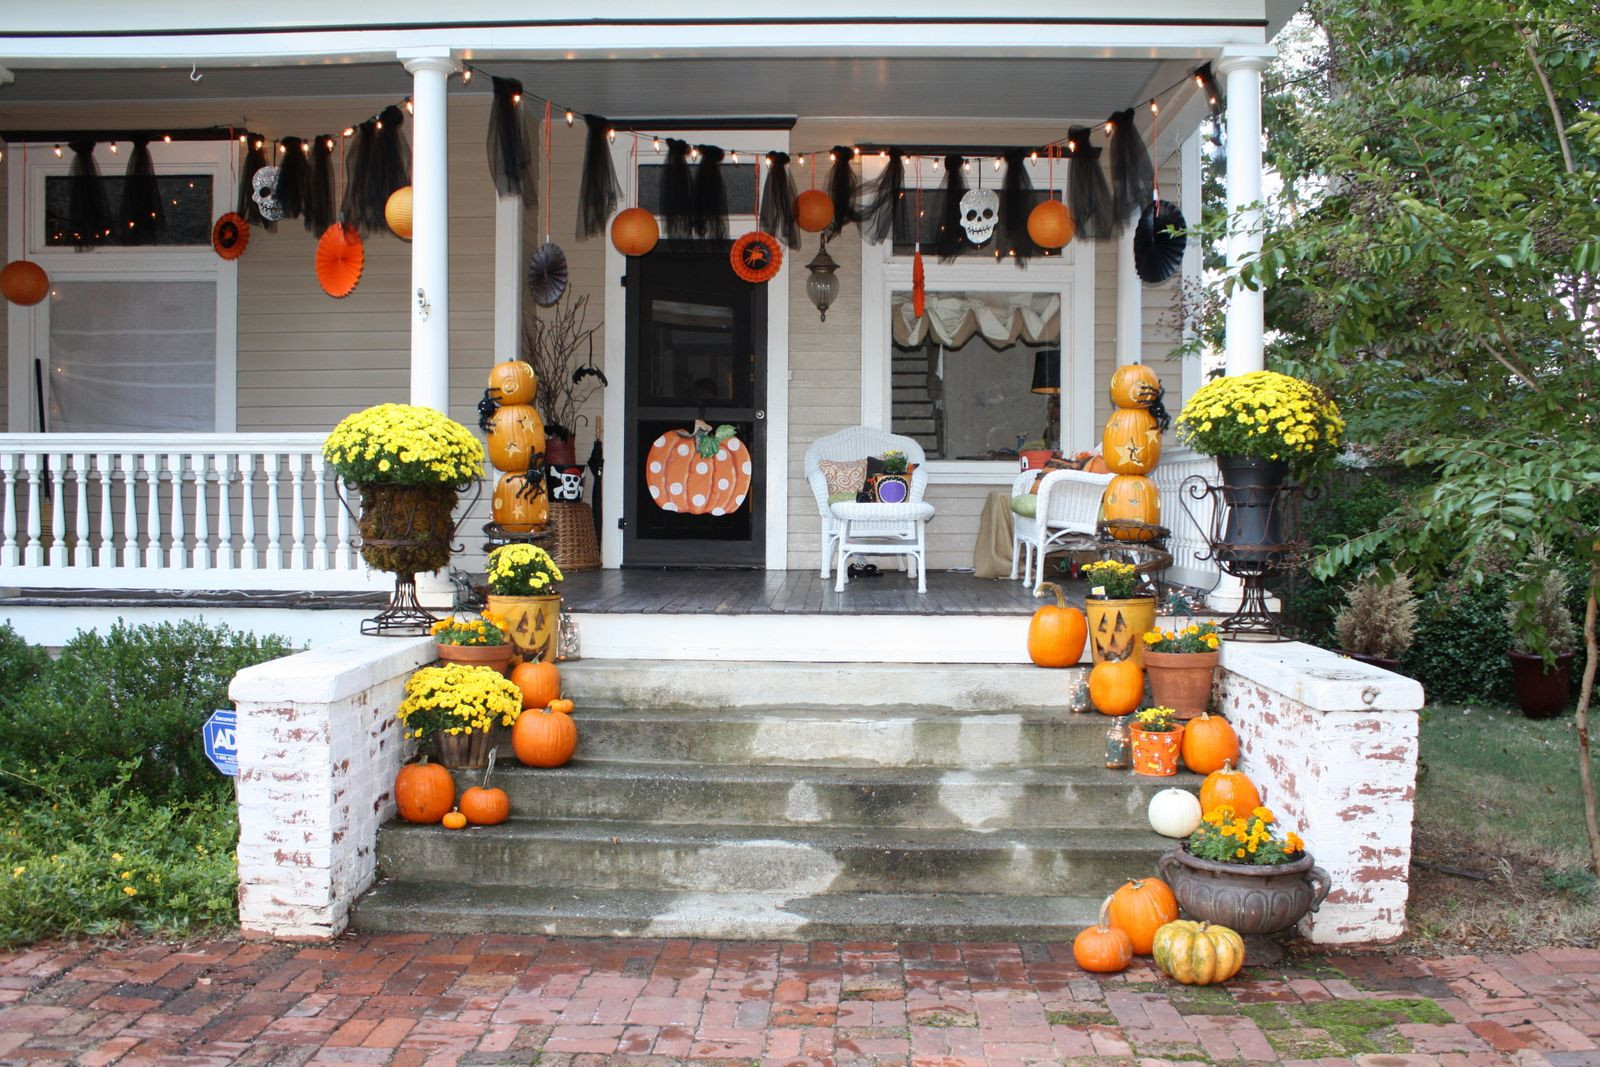 Halloween Outdoor Decorating Ideas
 Our Southern Nest October 2010